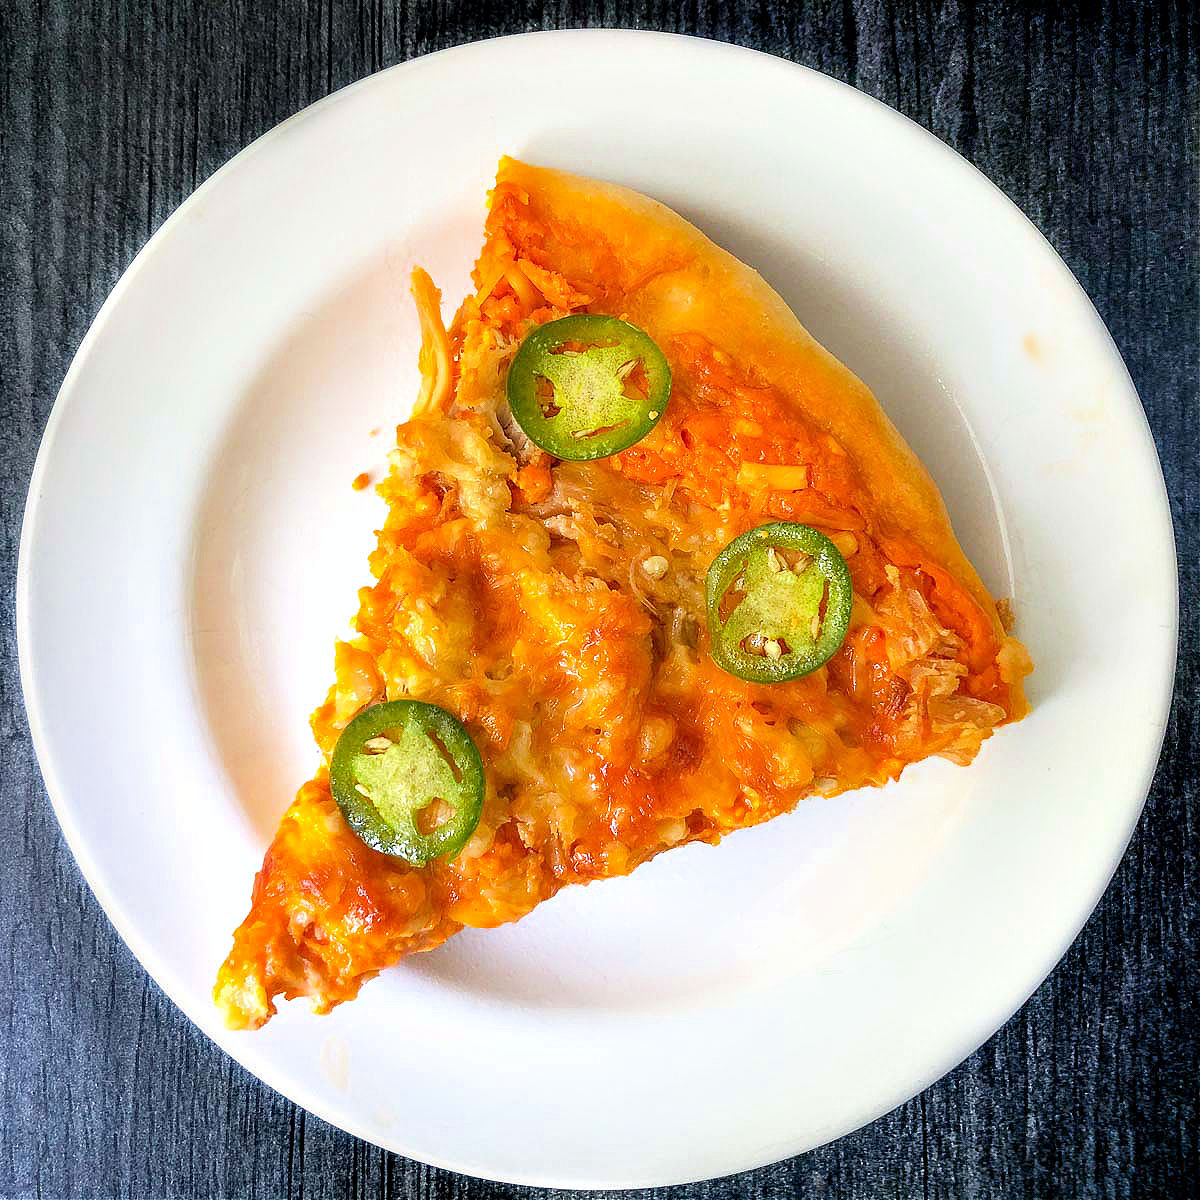 a slice of buffalo chicken pizza using 2 ingredient pizza crust on a white plate